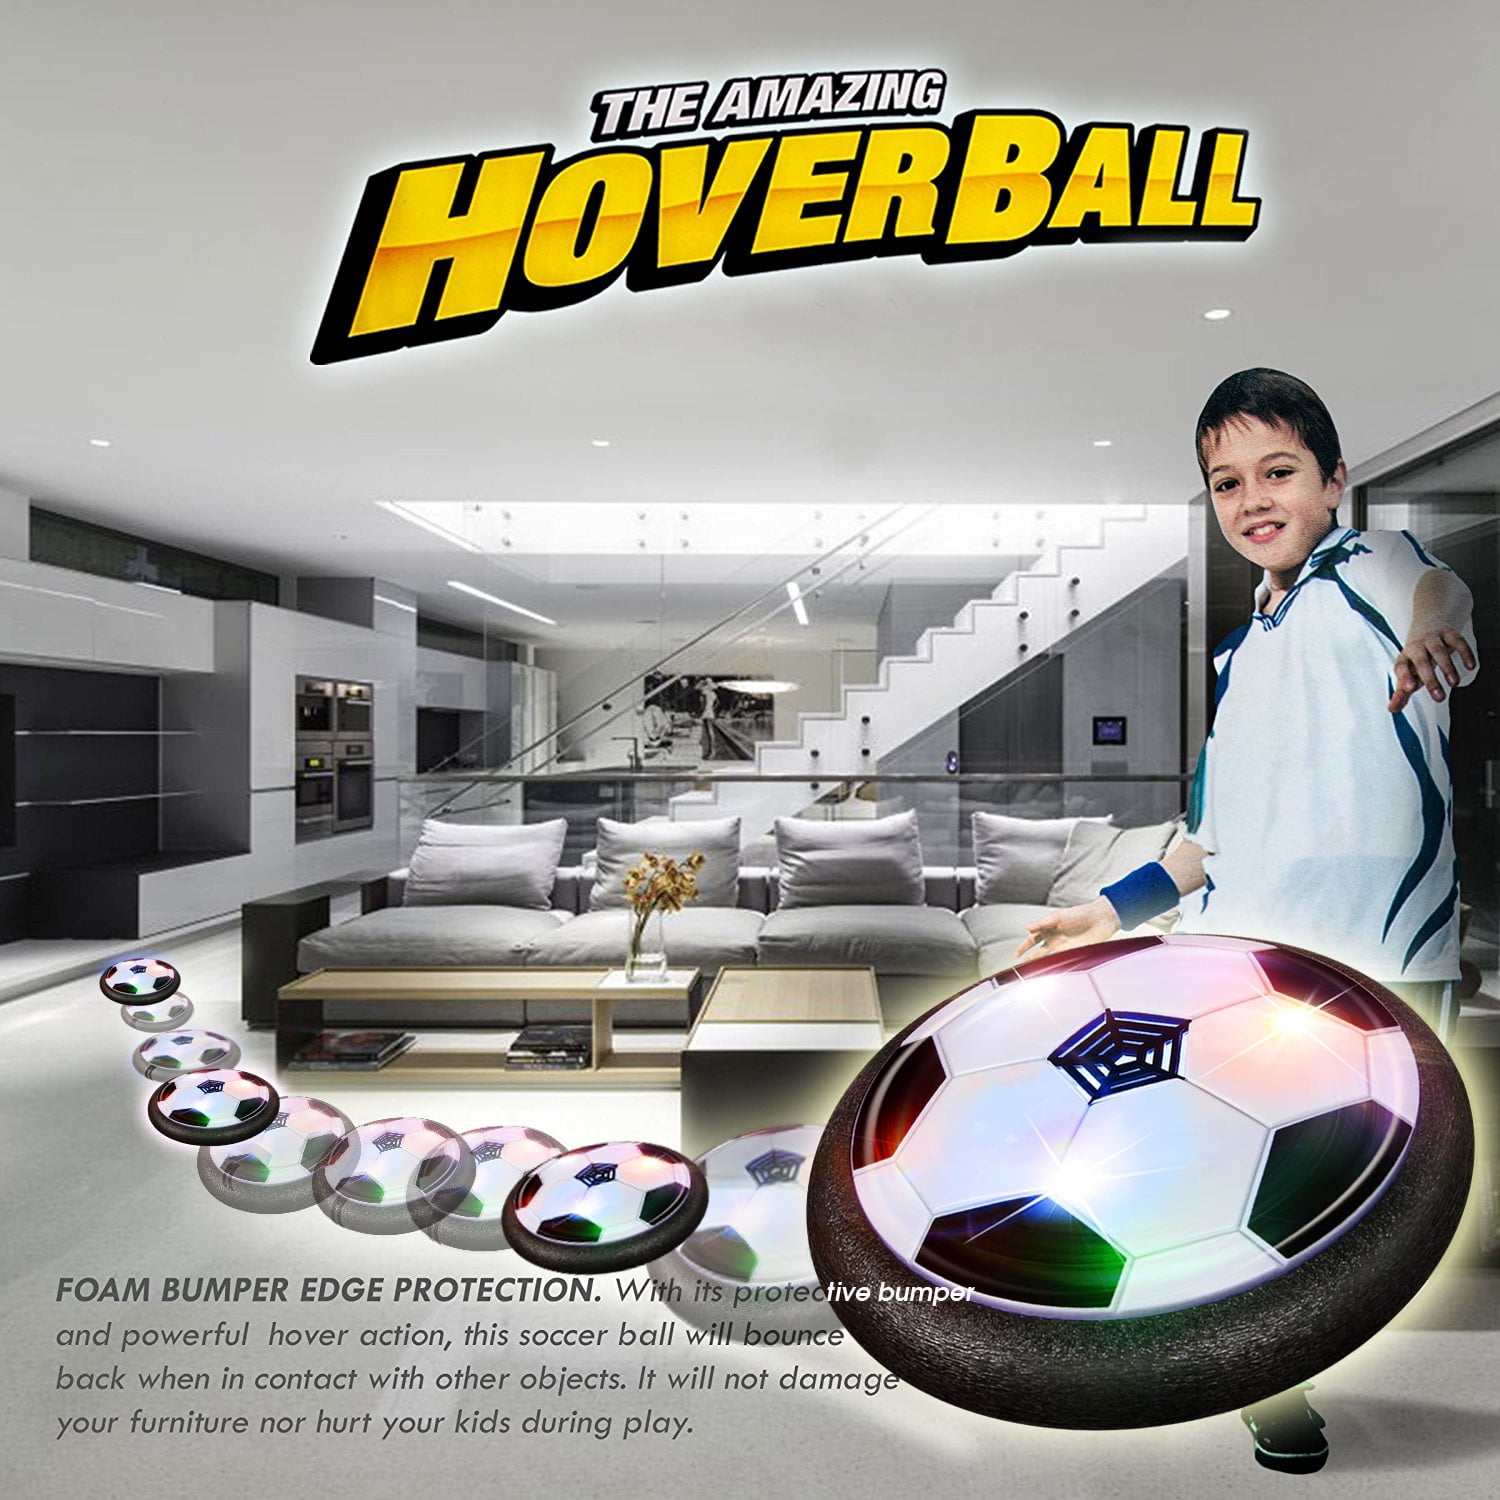 hover ball action